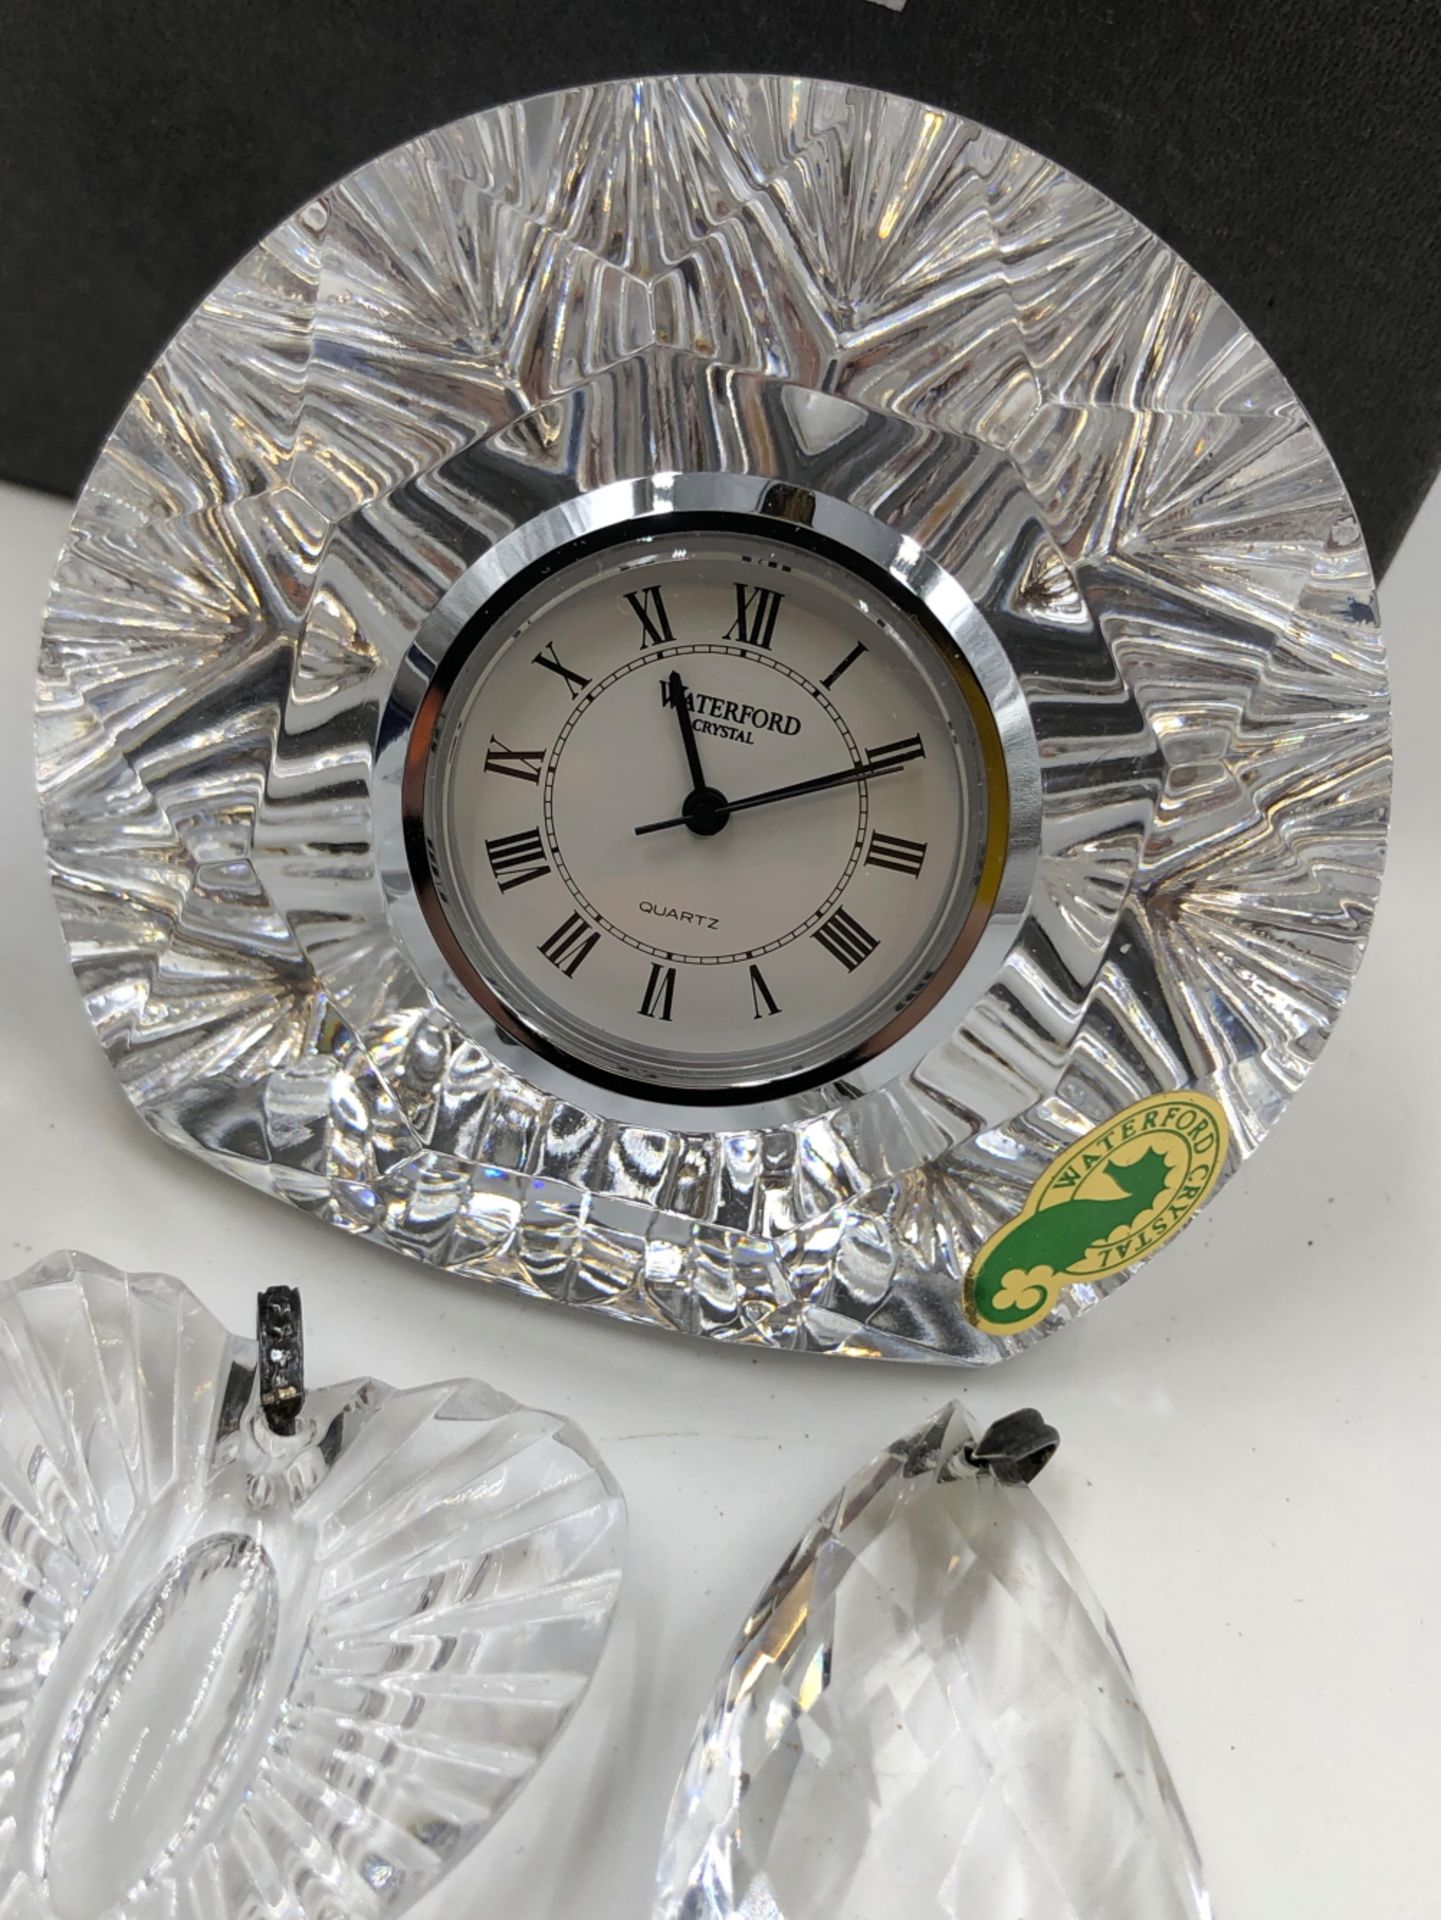 A WATERFORD CRYSTAL DESK CLOCK, A CRYSTAL HEART PENDANT AND A SIMILAR PENDANT IN A FACET CUT - Image 3 of 4